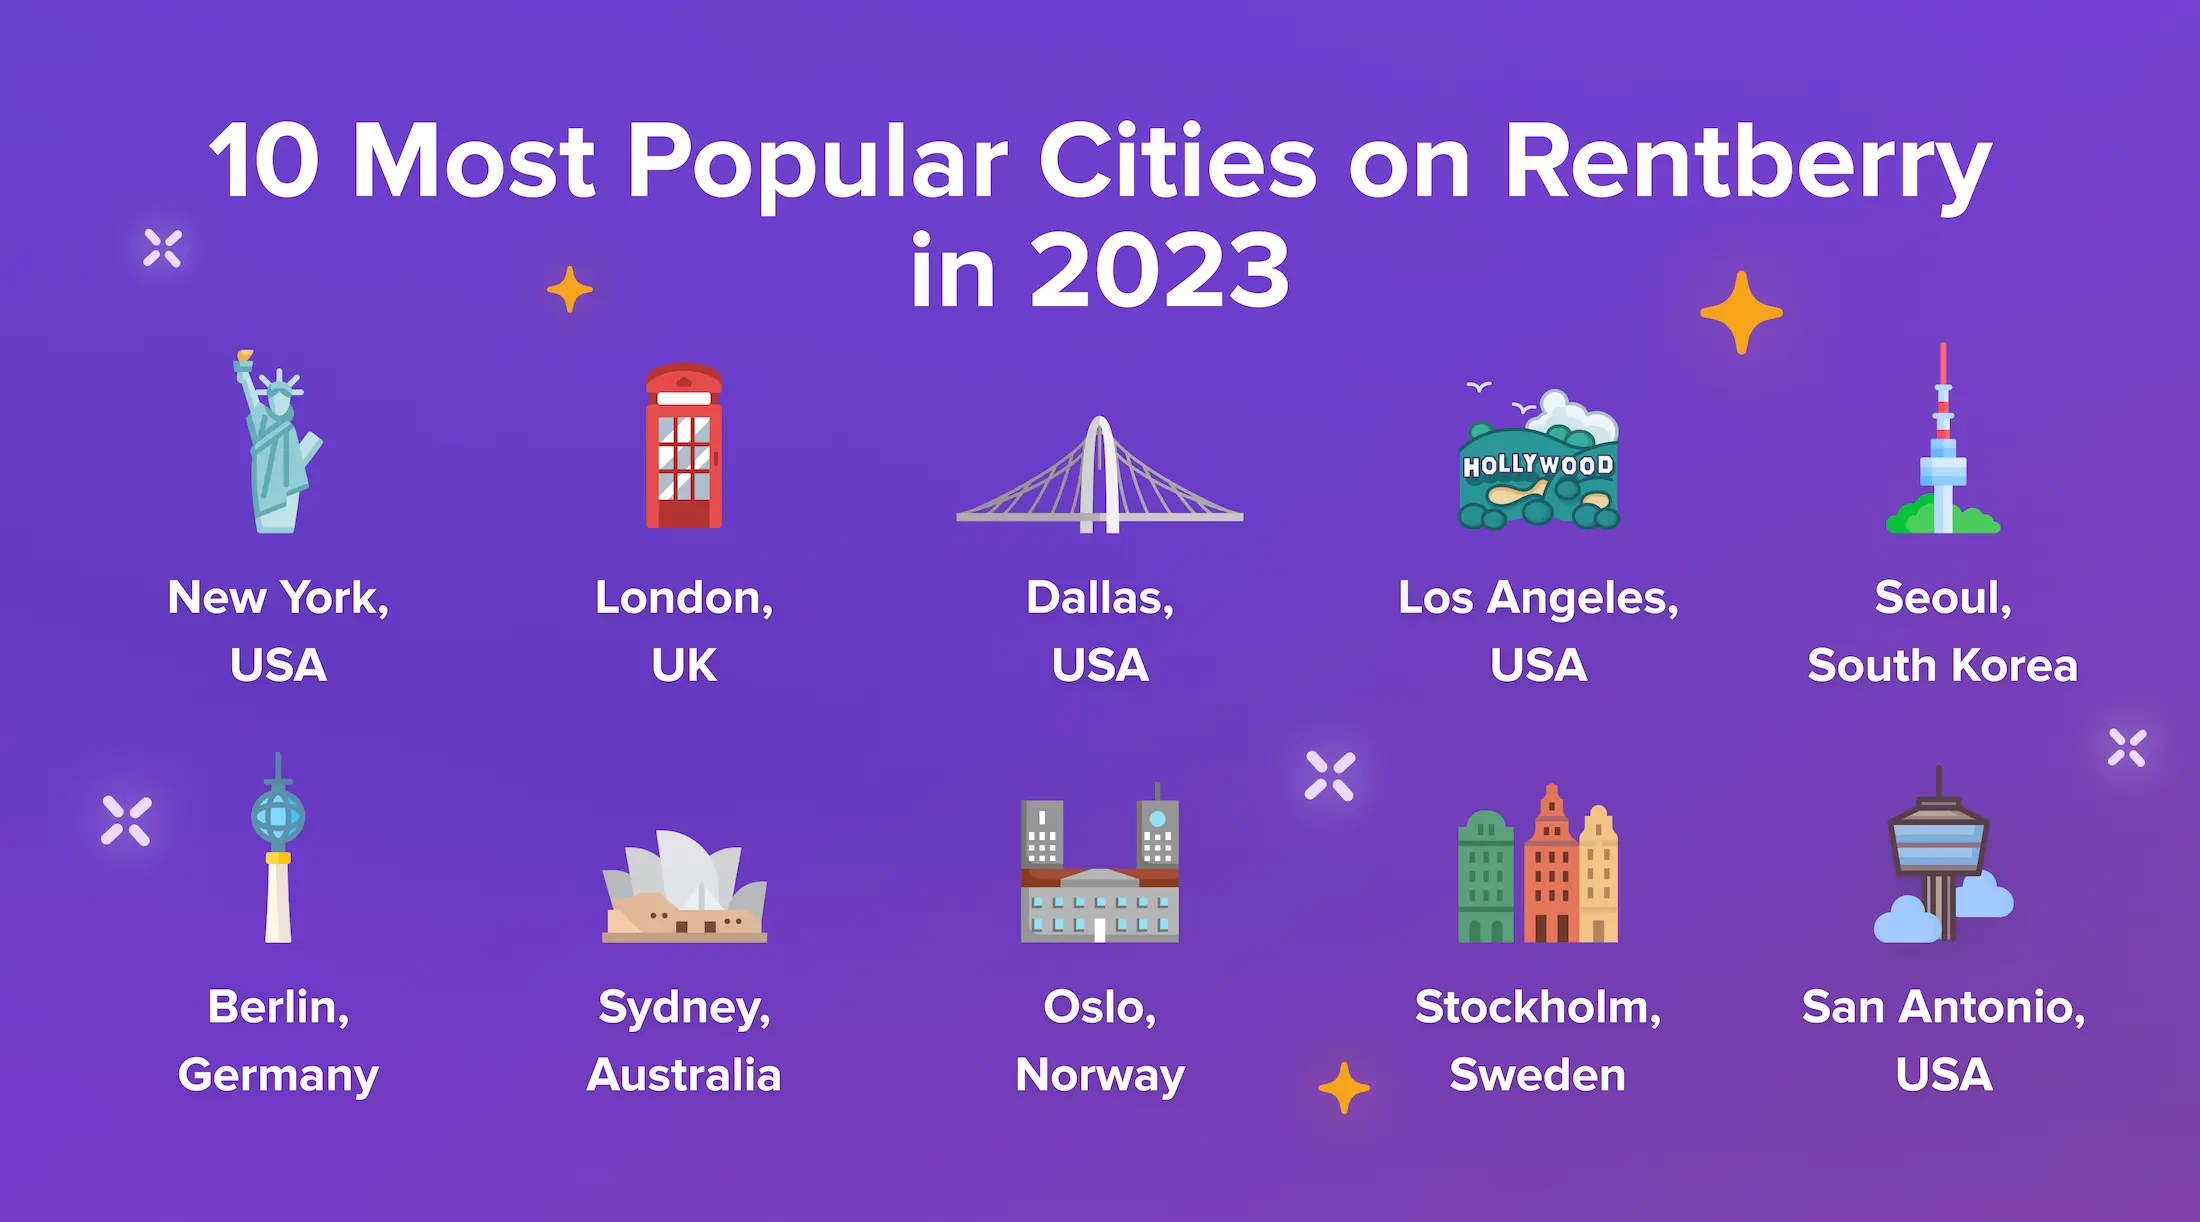 The most popular location on Rentberry in 2023